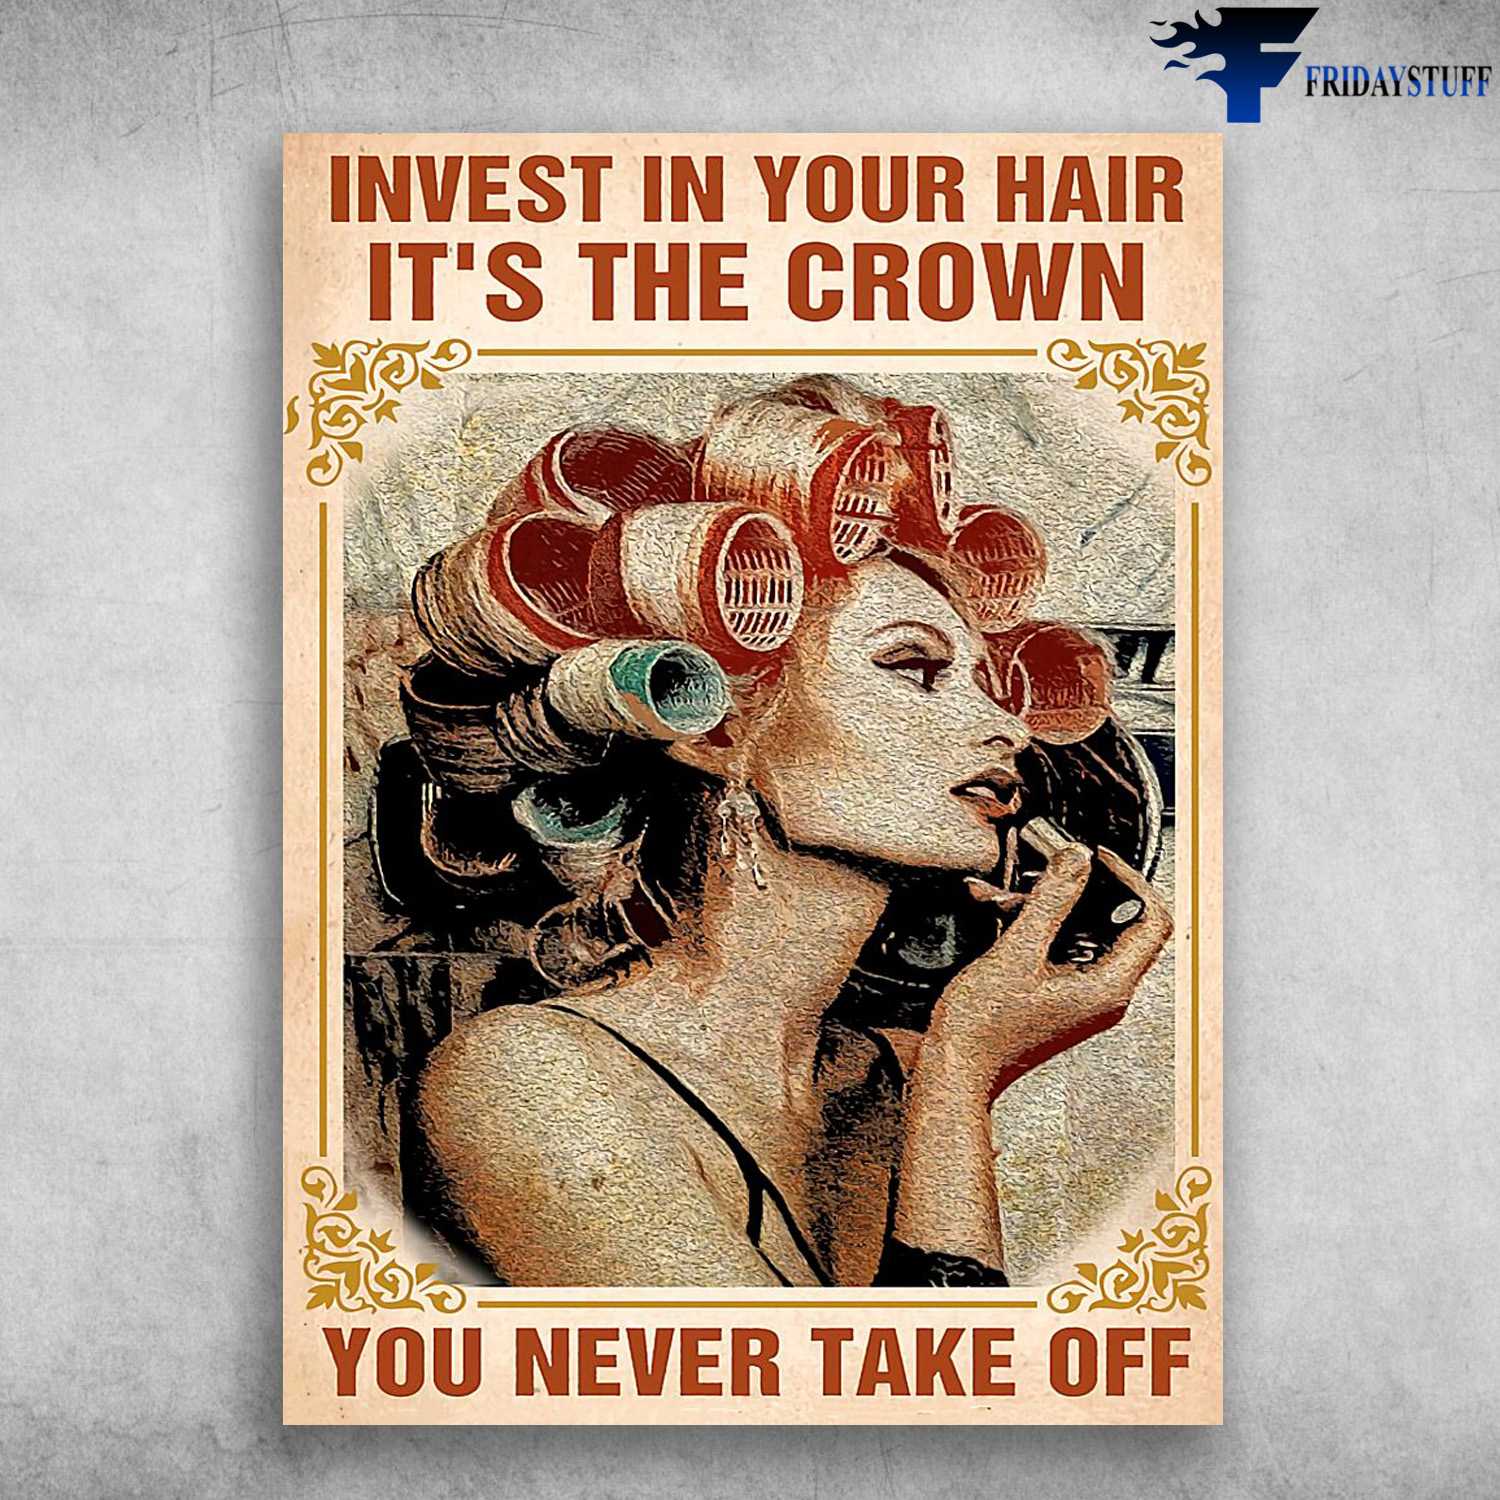 Hairdresser Poster, Invest In Your Hair, It's The Crown, You Never Take Off